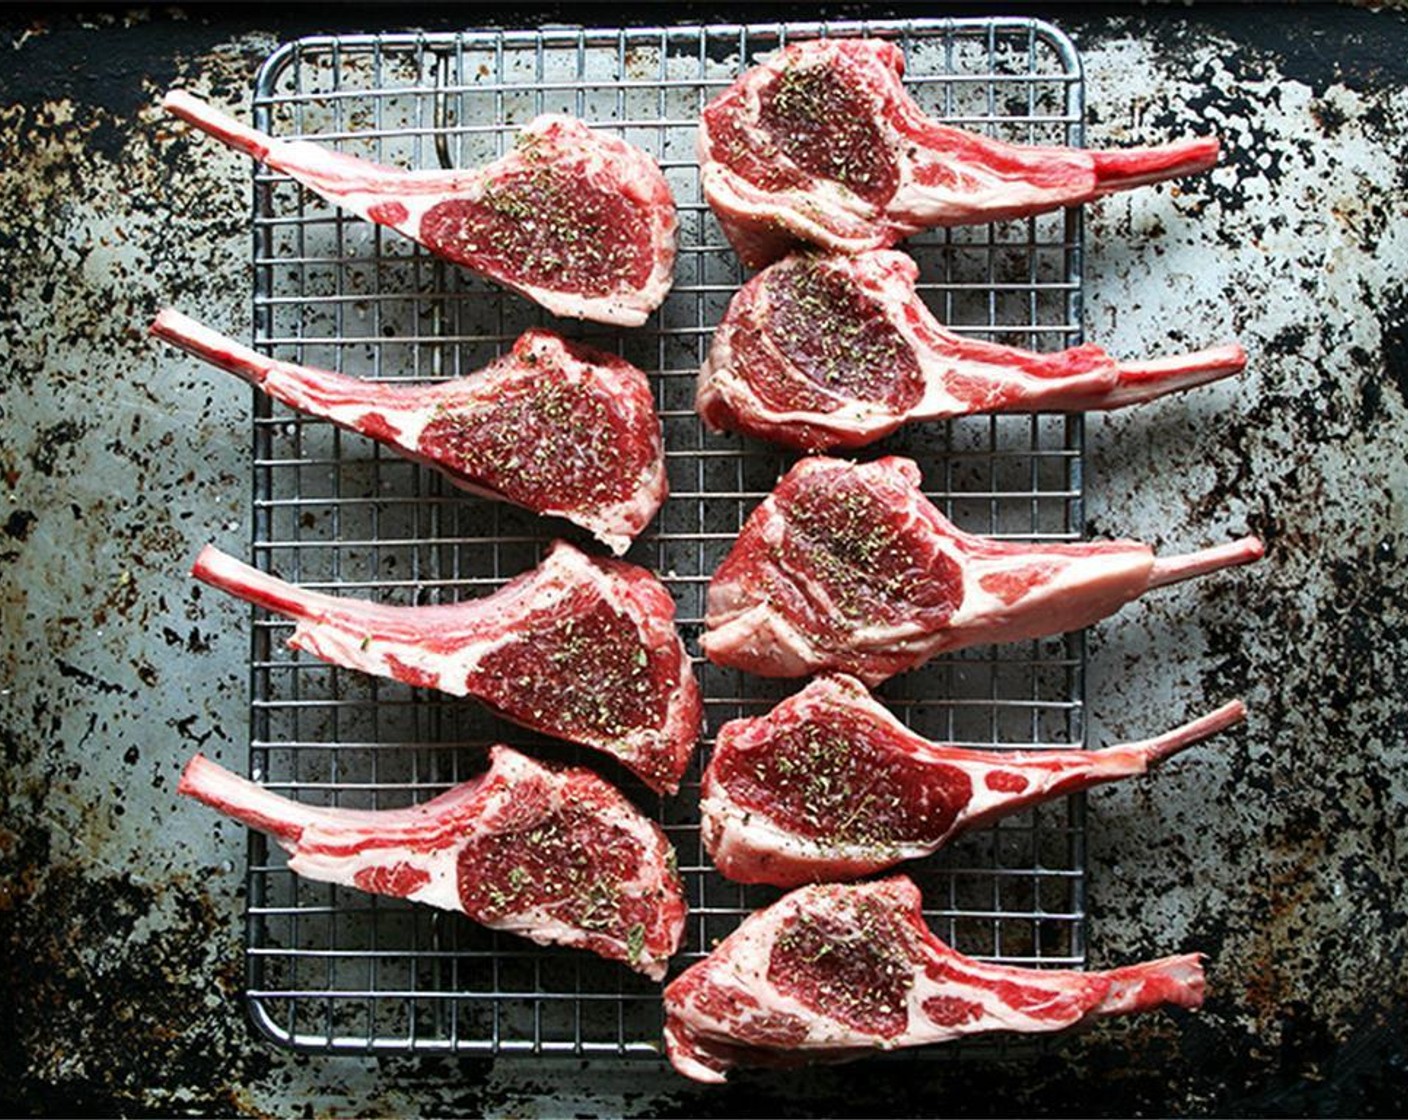 step 5 Season both sides of the lamb chops all over with salt, pepper and Fresh Oregano (to taste). Place on a broiling pan.